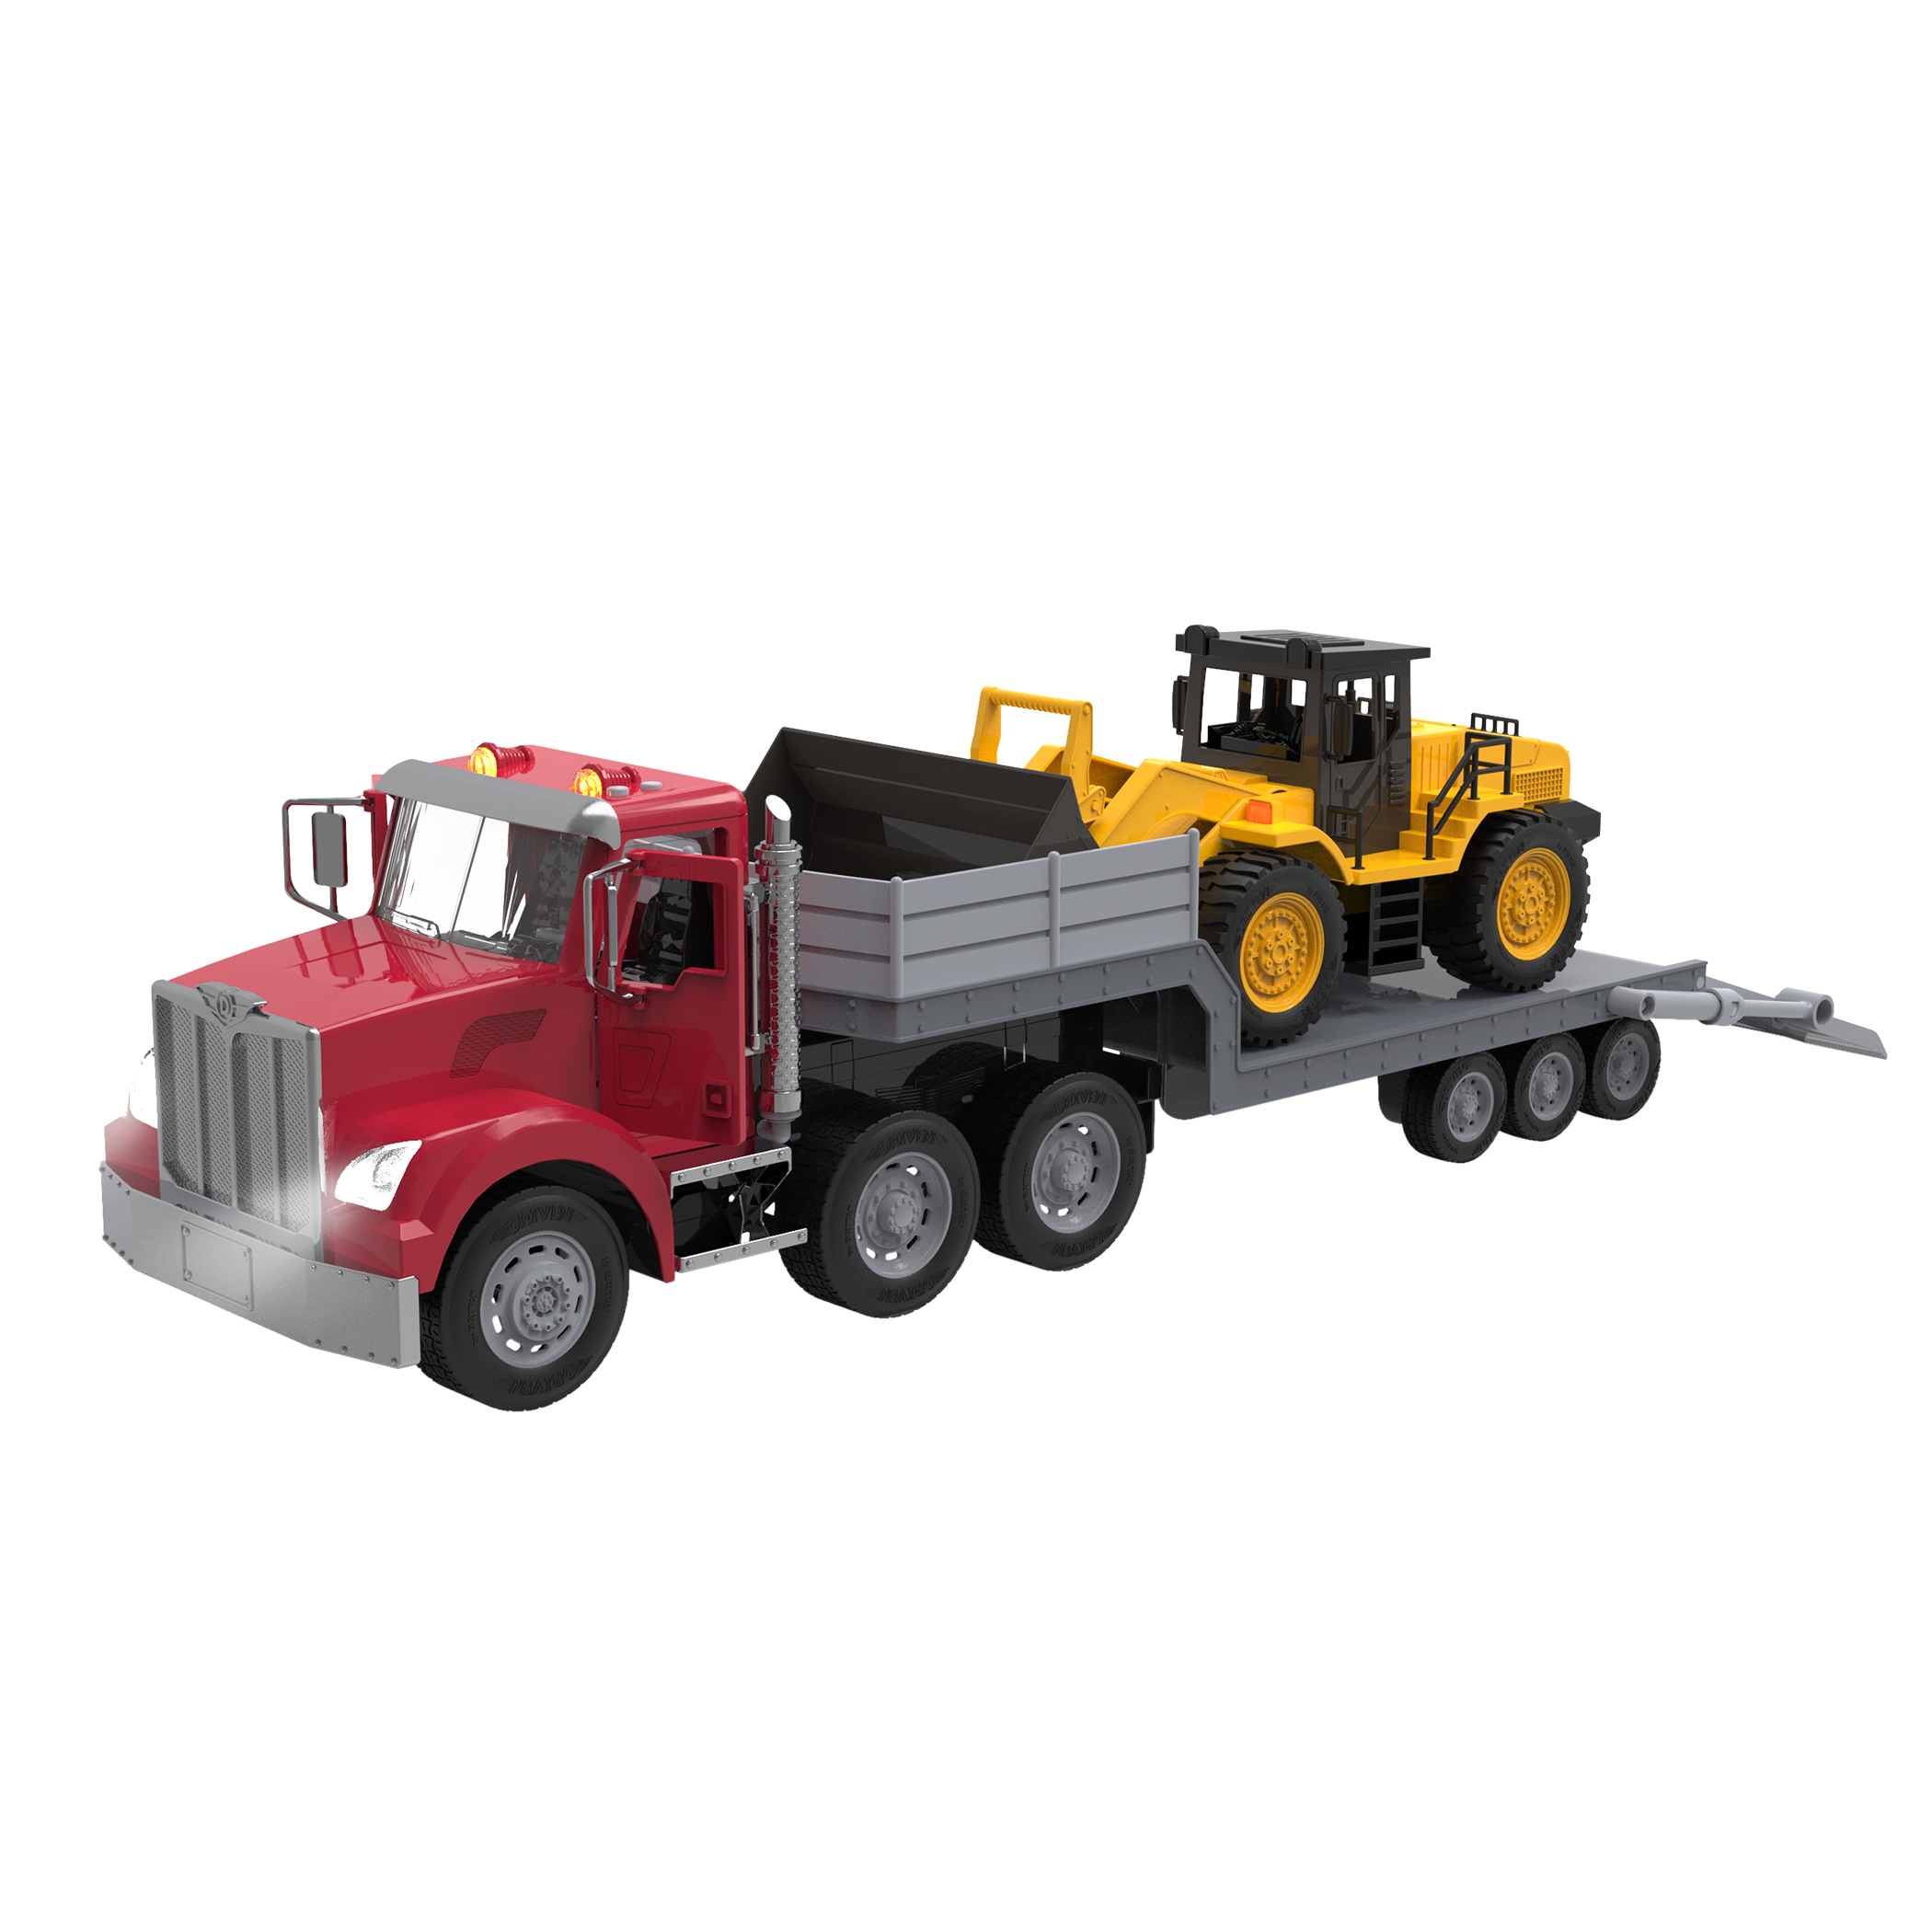 Branded Big Rig Tractor Trailer Transport Toy Trucks Big Toy Truck Series Tracktor Trailer Flatbed and Excovator